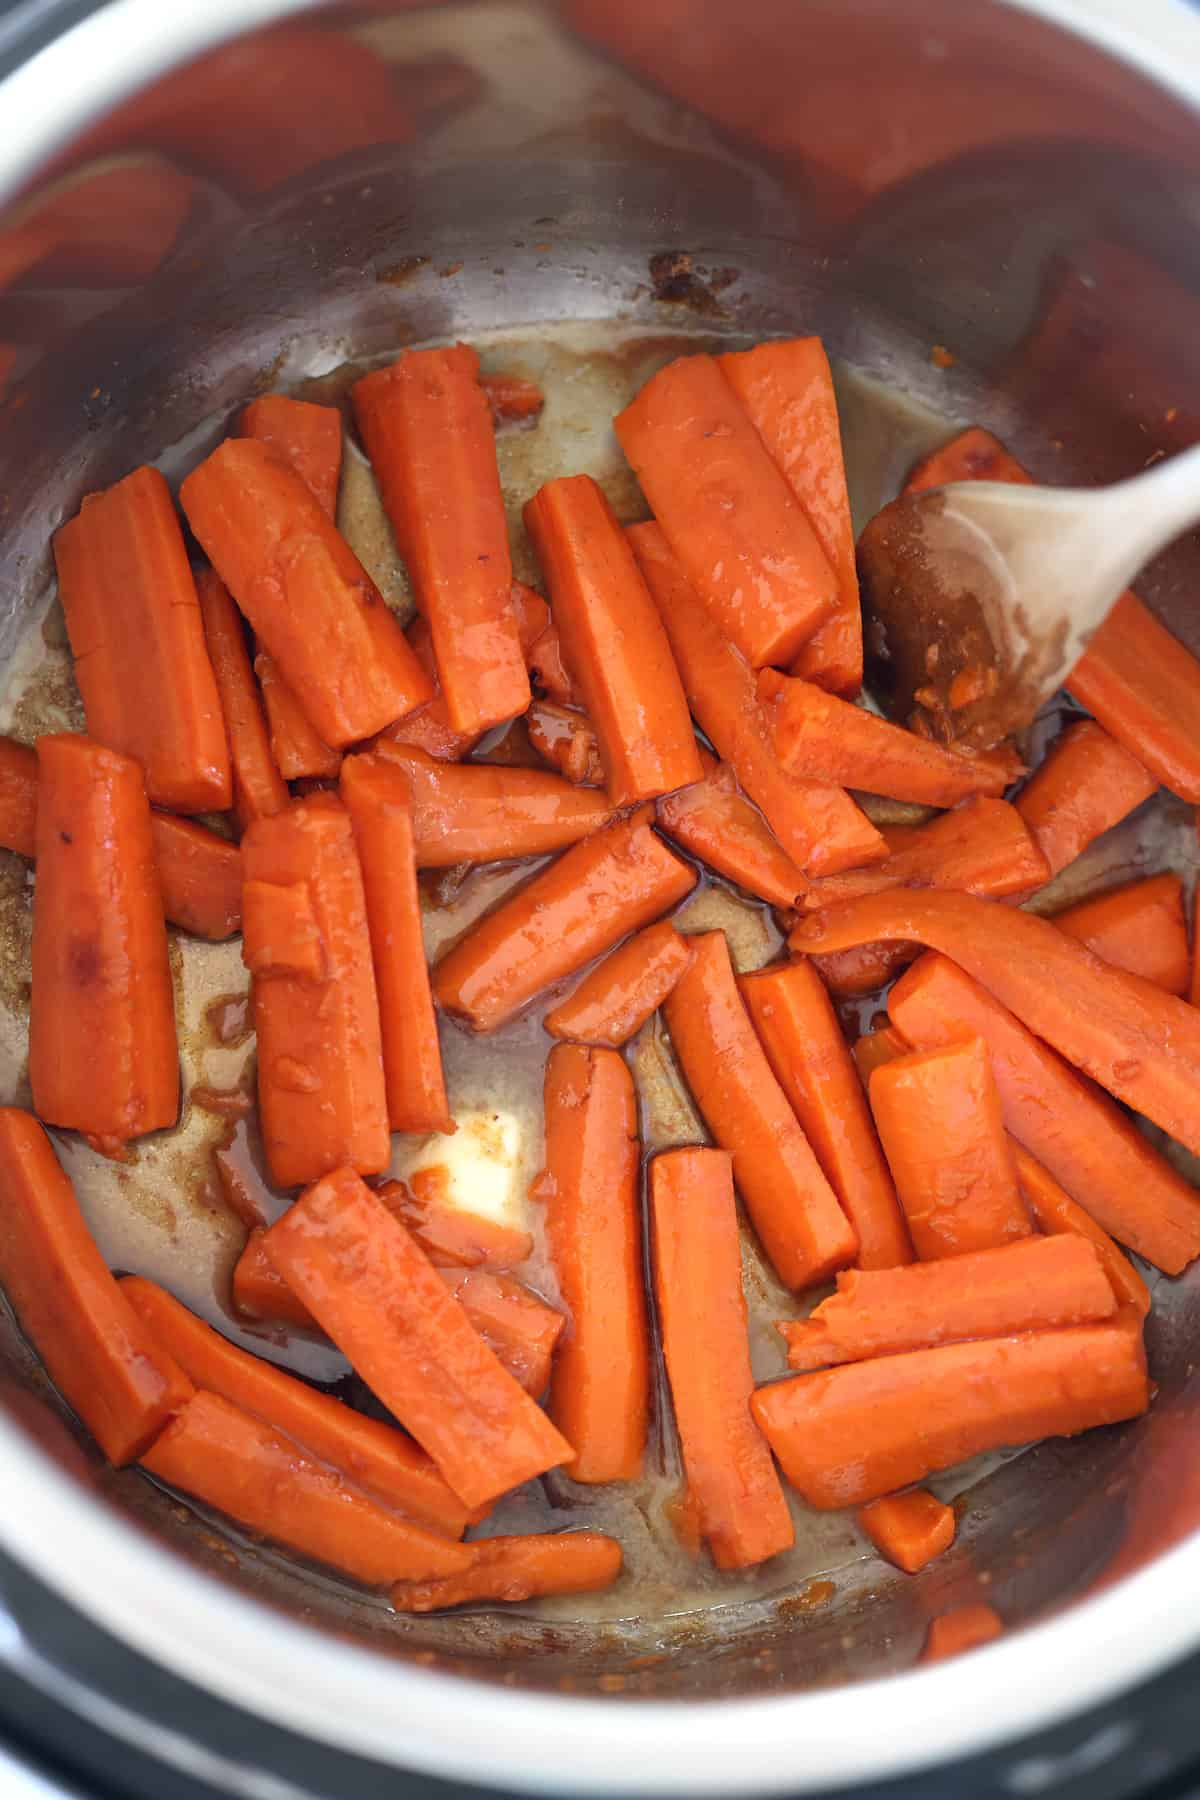 Instant Pot carrots mixed with a buttery brown sugar glaze